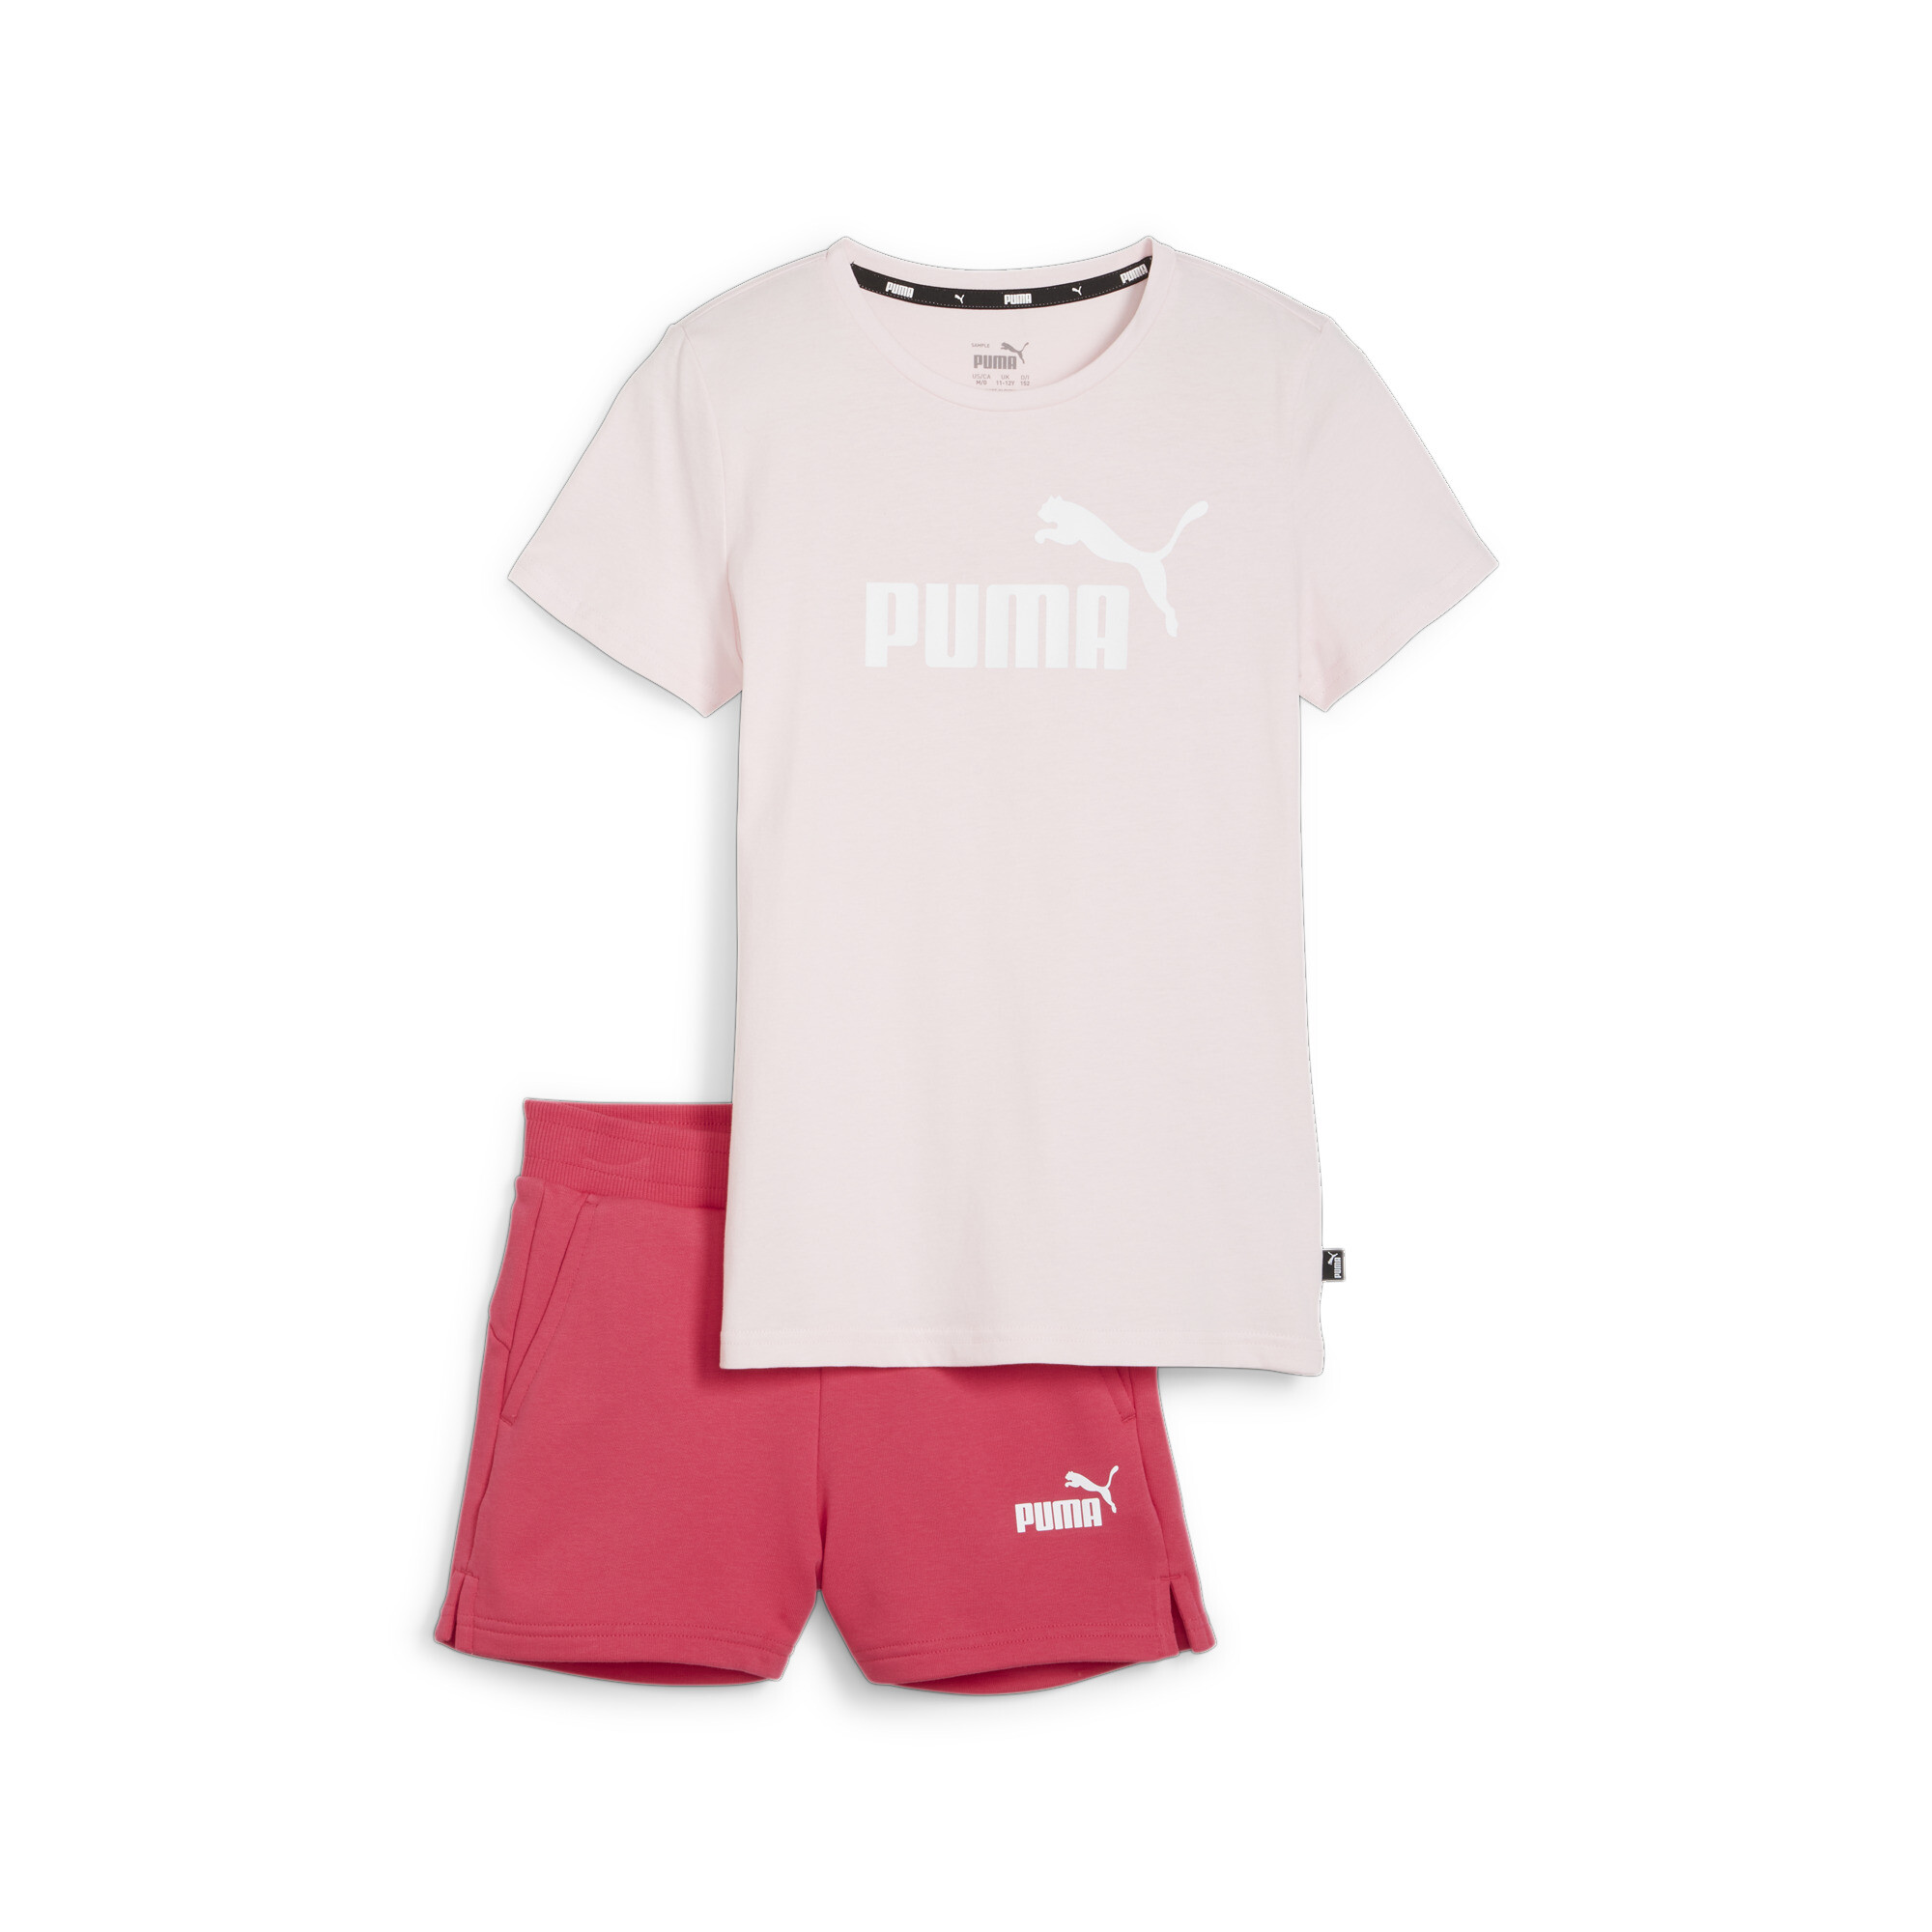 Women's Puma Logo Tee And Shorts Youth Set, Pink, Size 7-8Y, Clothing